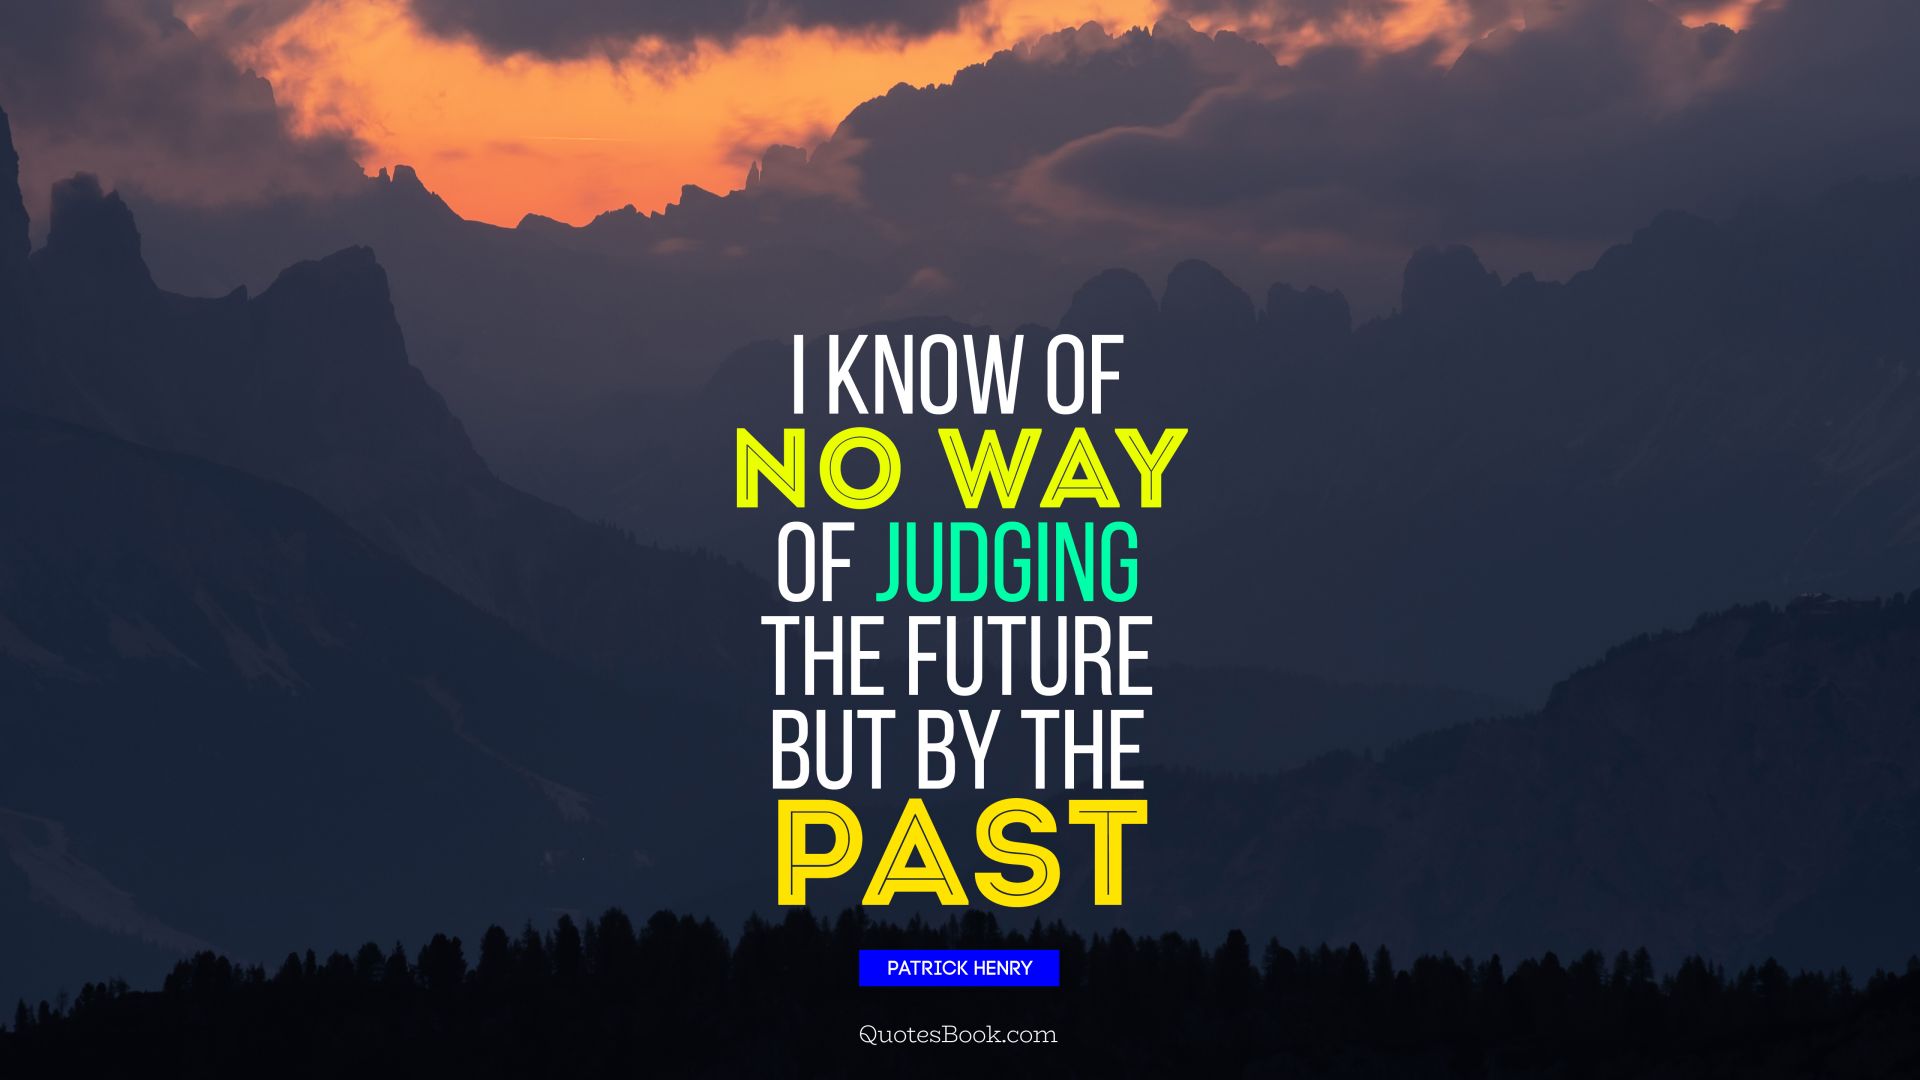 I know of no way of judging the future but by the past. - Quote by Patrick Henry